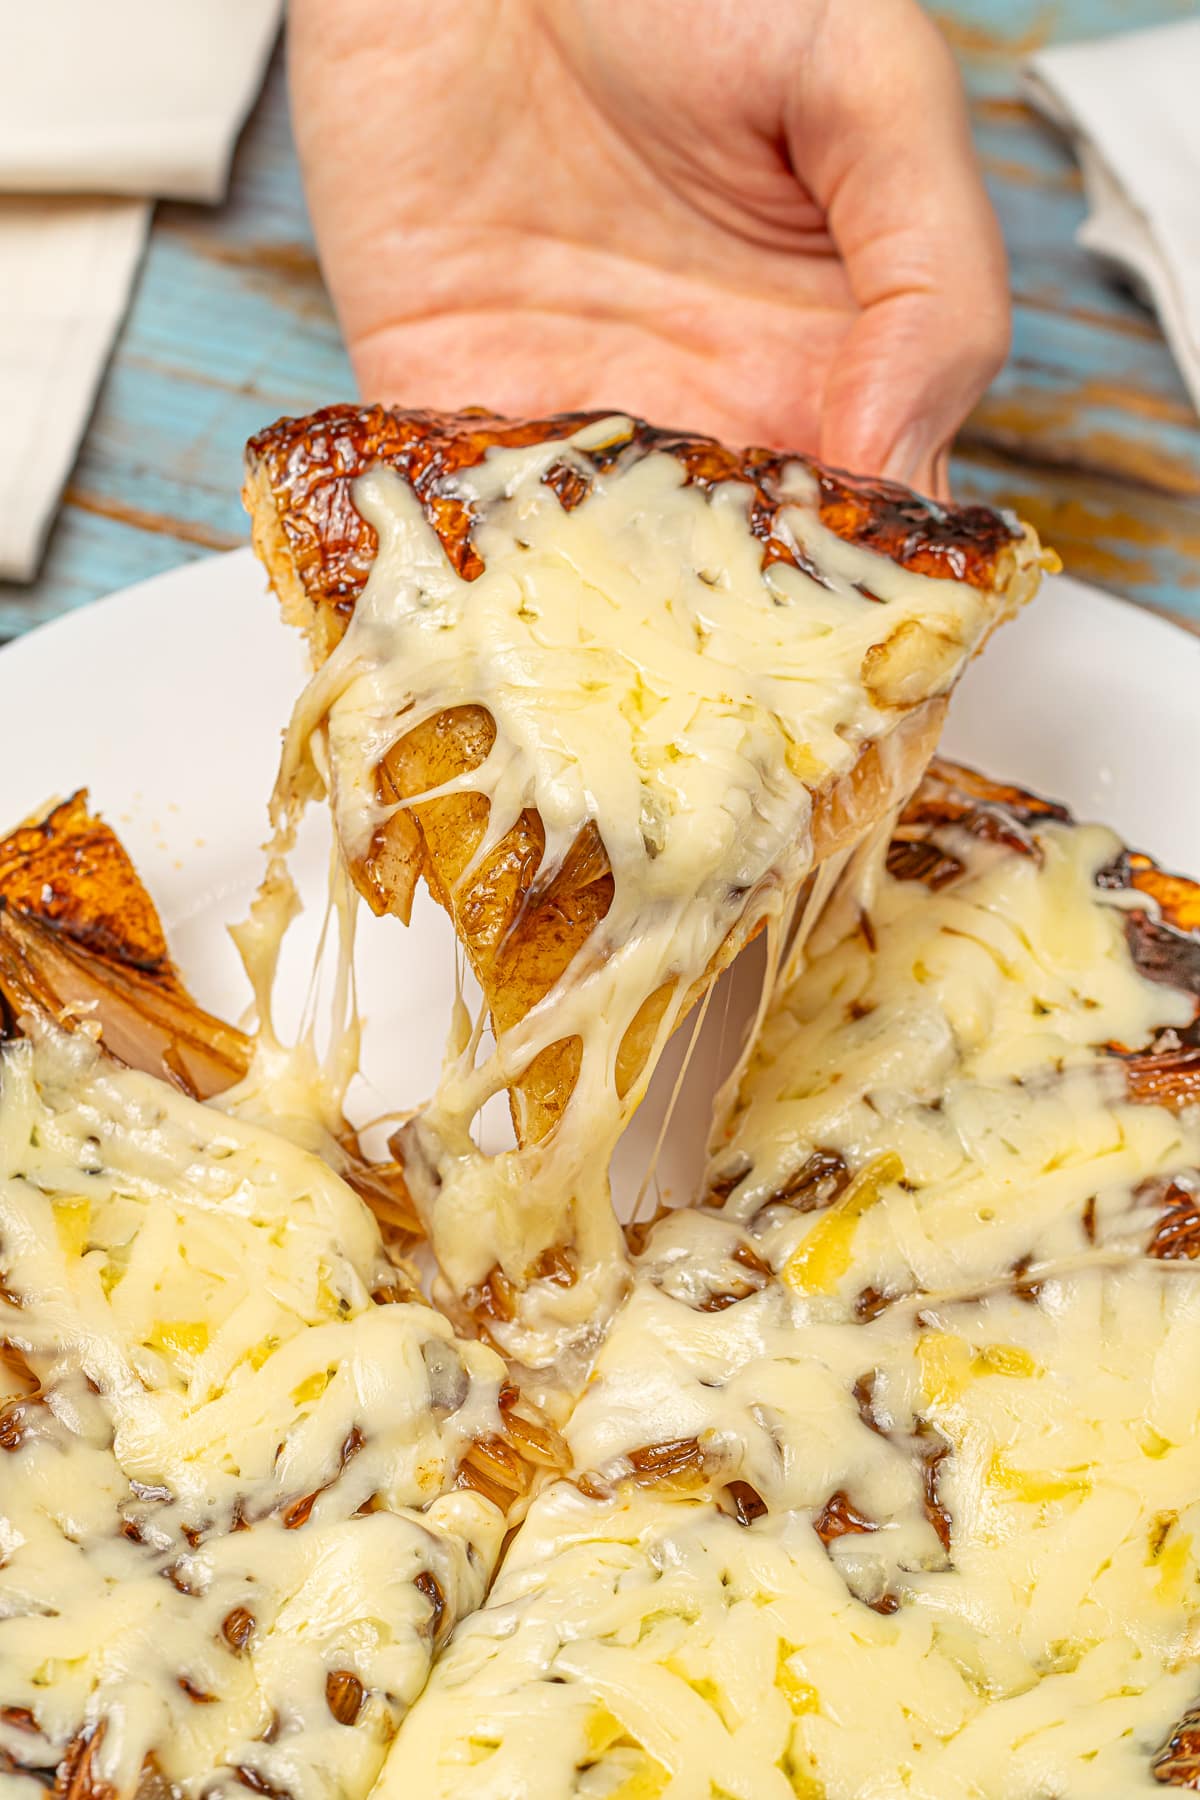 Hand pulling a cheesy slice from a caramelized onion tart, showcasing the melted cheese.